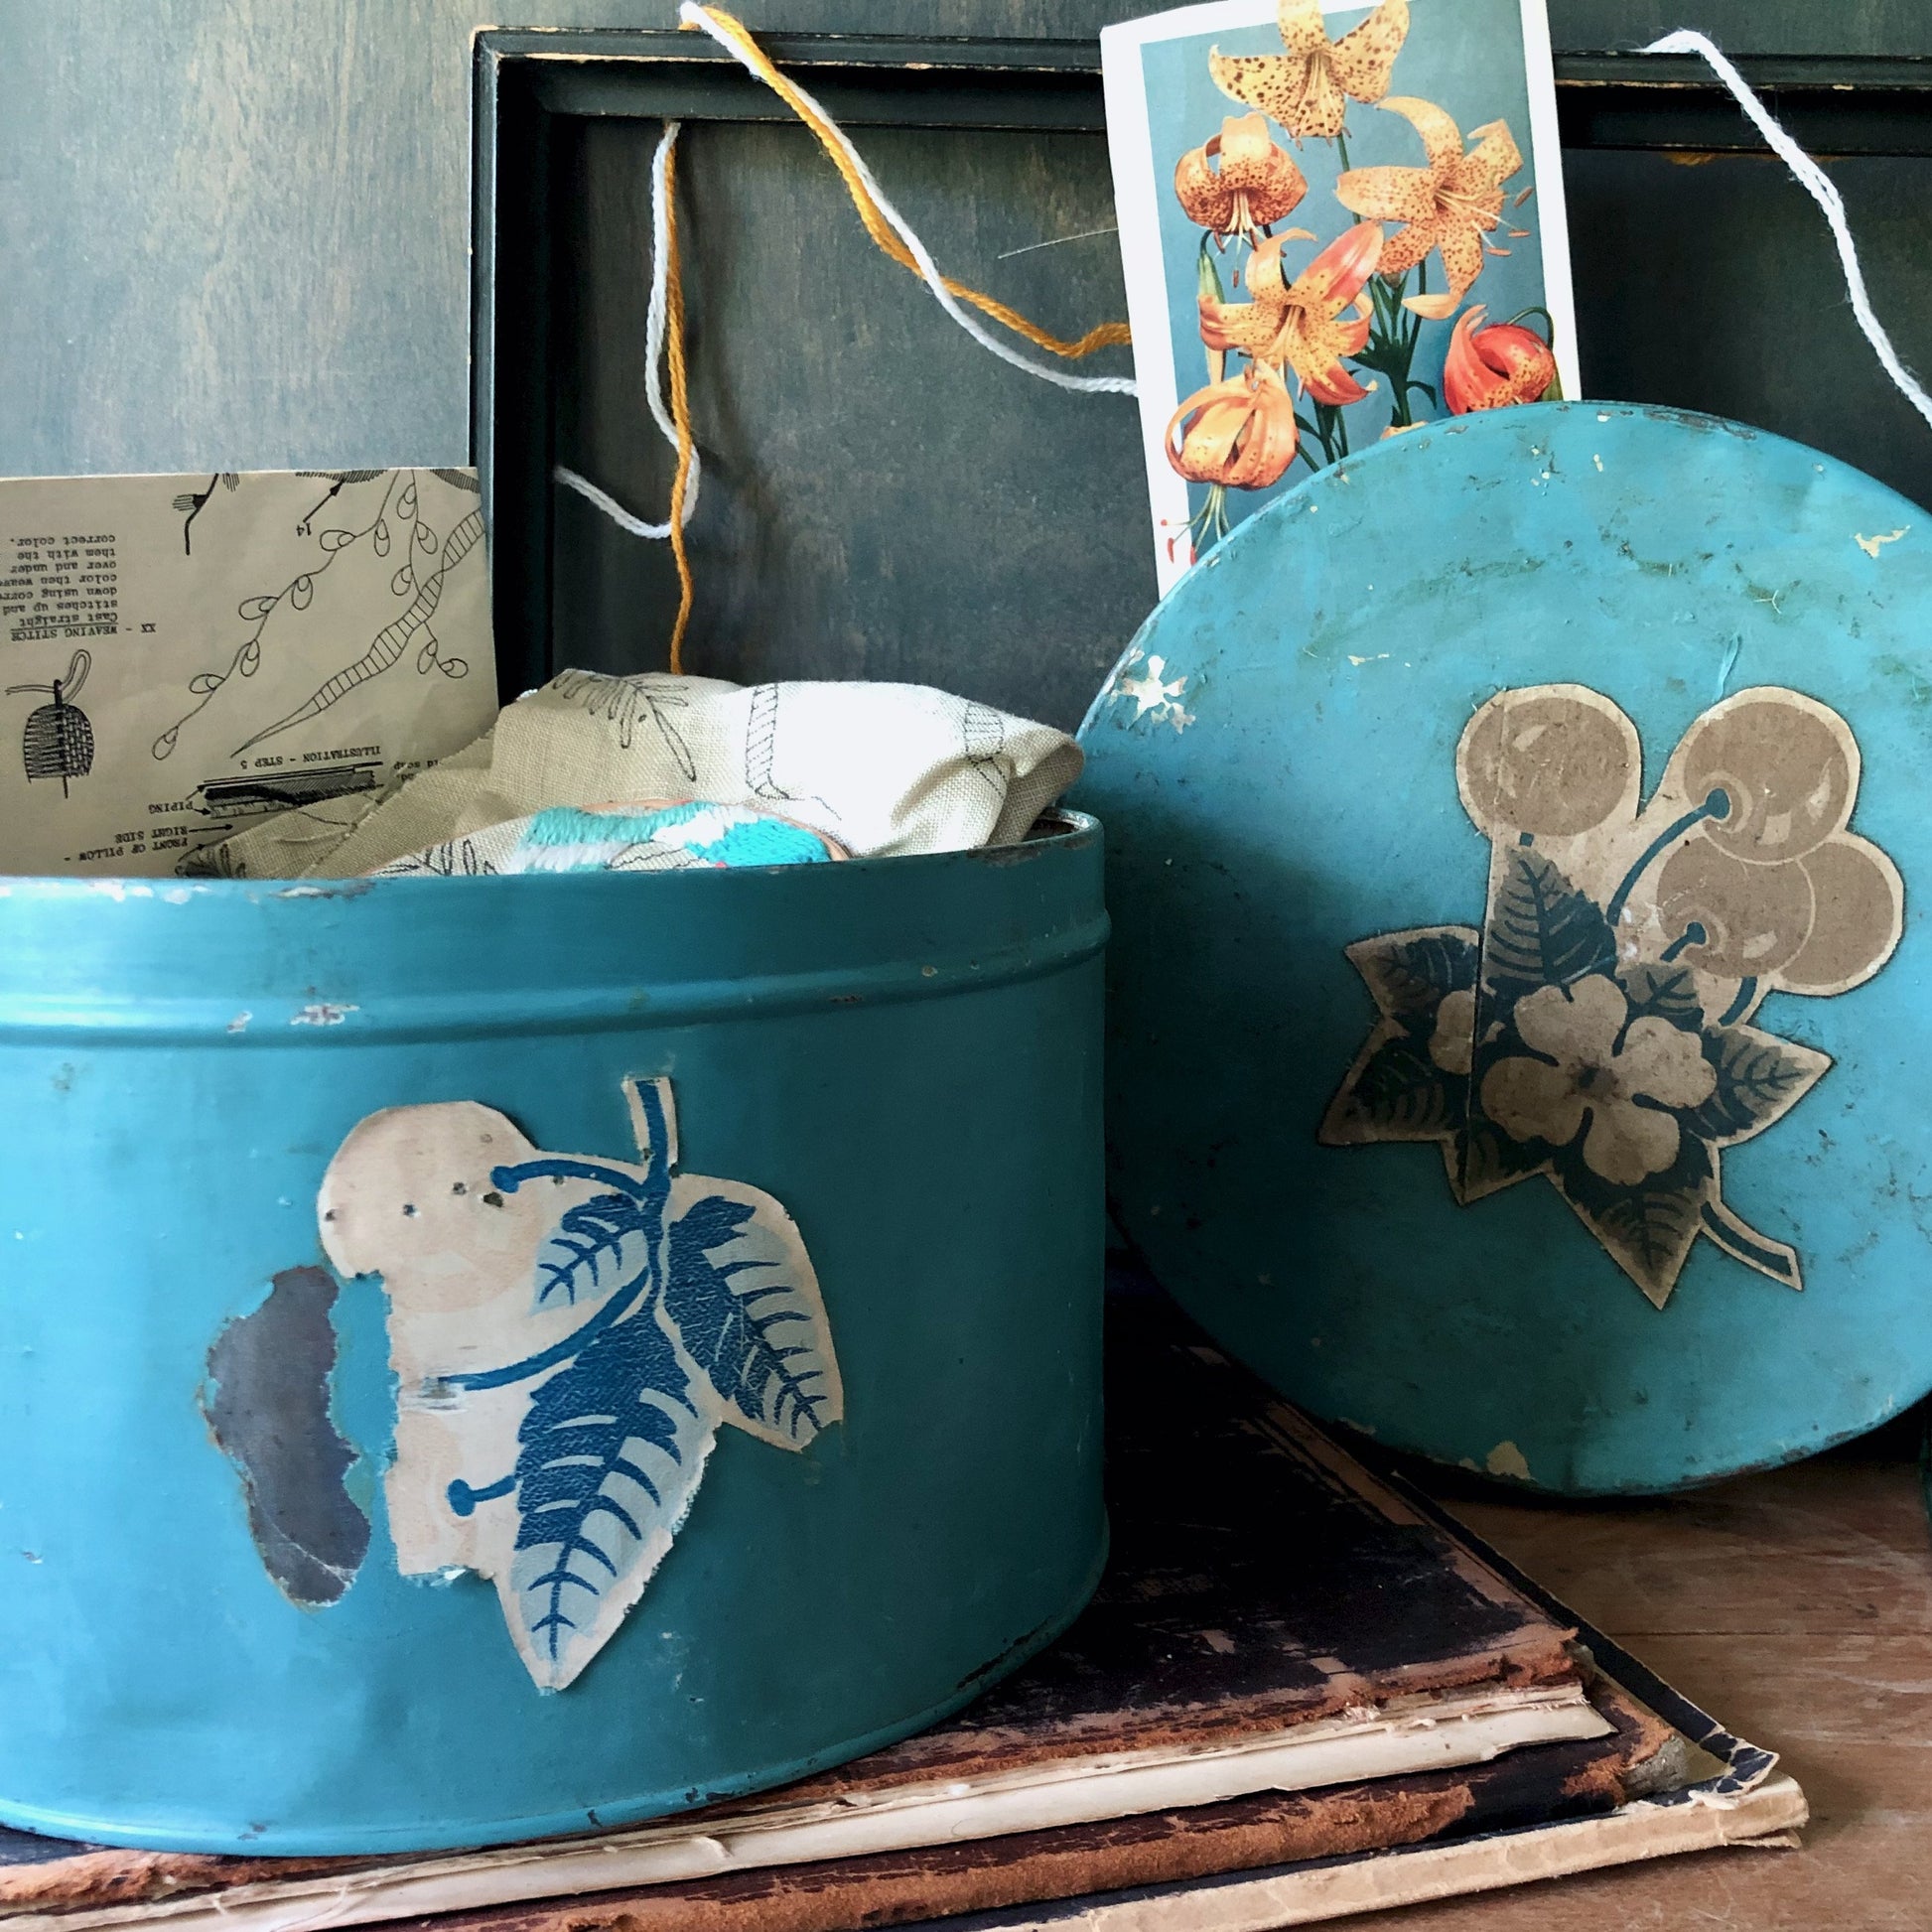 Rustic Old Blue Storage Tin with Decals (c.1900s)